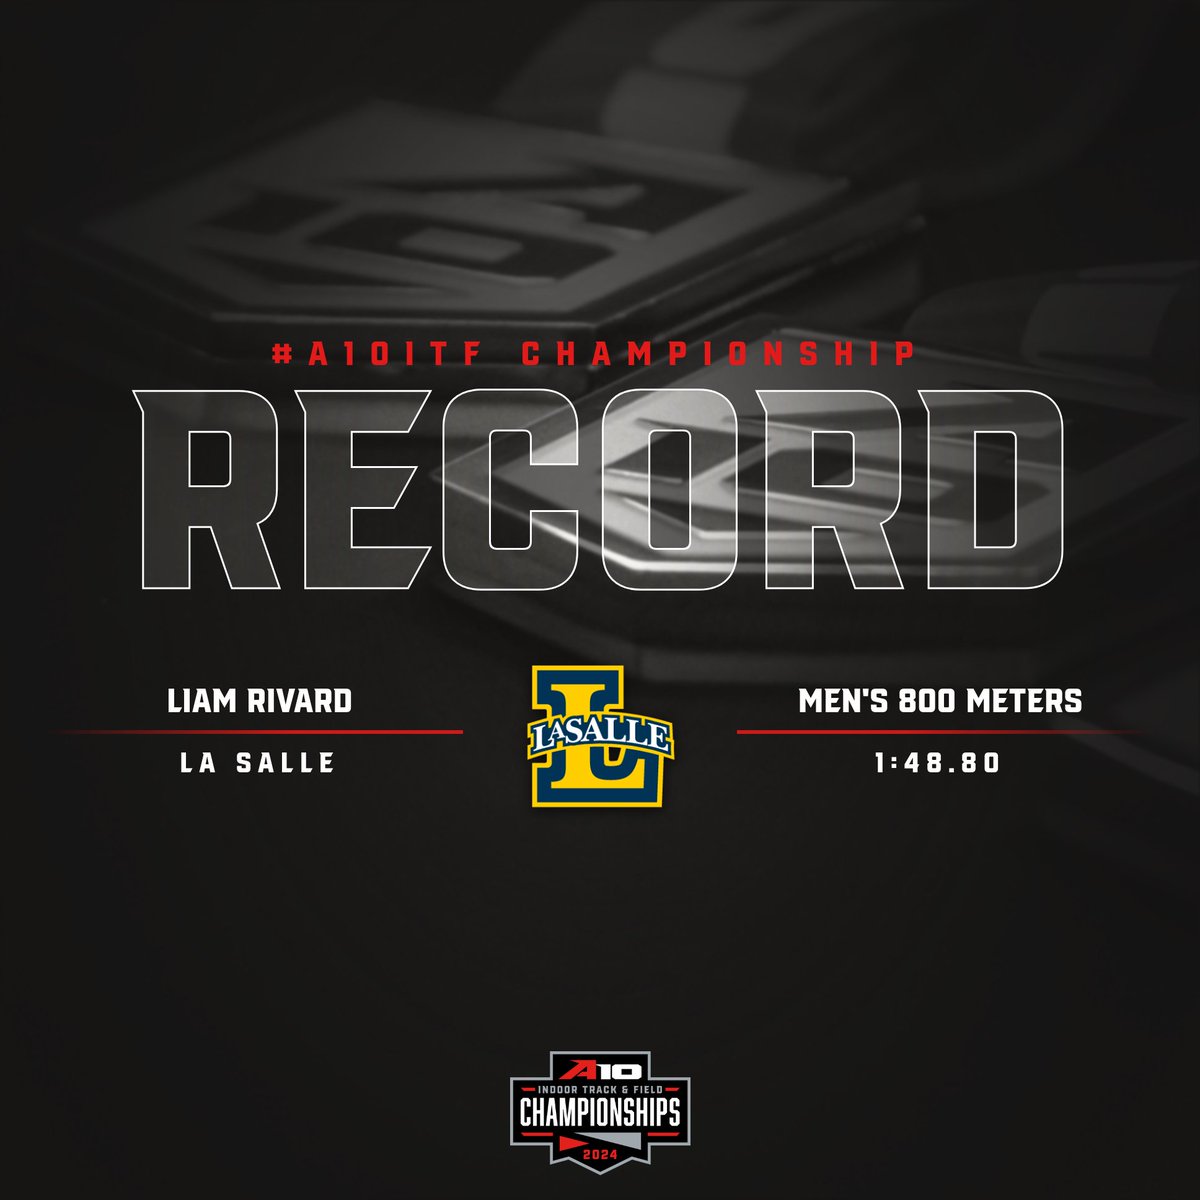 🚨 RECORD ALERT 🚨 @LaSalle_XCTF Liam Rivard sets a new record in the #A10ITF Championship men's 800 meters with a 1:48.80 🥇 Eli Baker of @RhodyMTrack also broke the record with a 1:50.77, earning 🥈 Blaine Lacey of @GeorgeMasonTFXC set tjhe mark of 1:50.95 in 2018